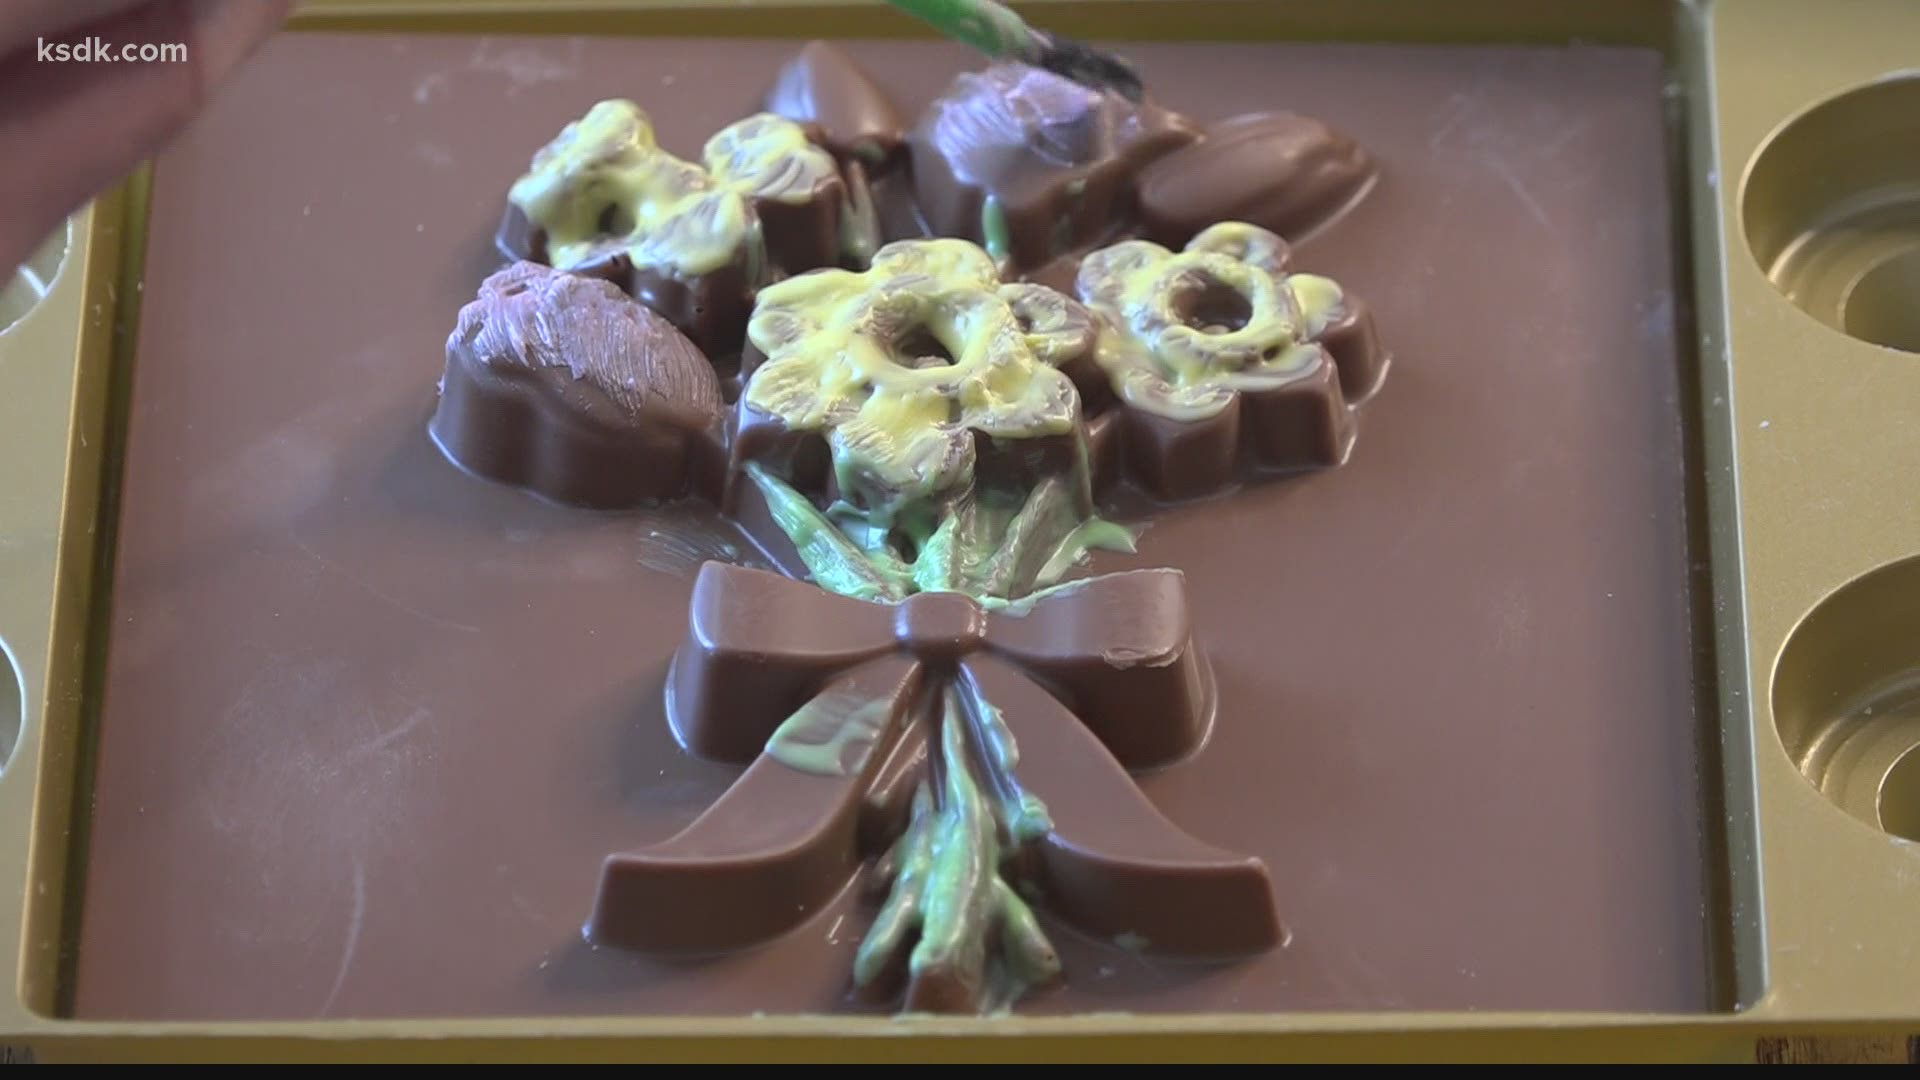 Find just what you need to spoil mom this Mother’s Day at Bissinger’s and Chocolate Chocolate Chocolate.